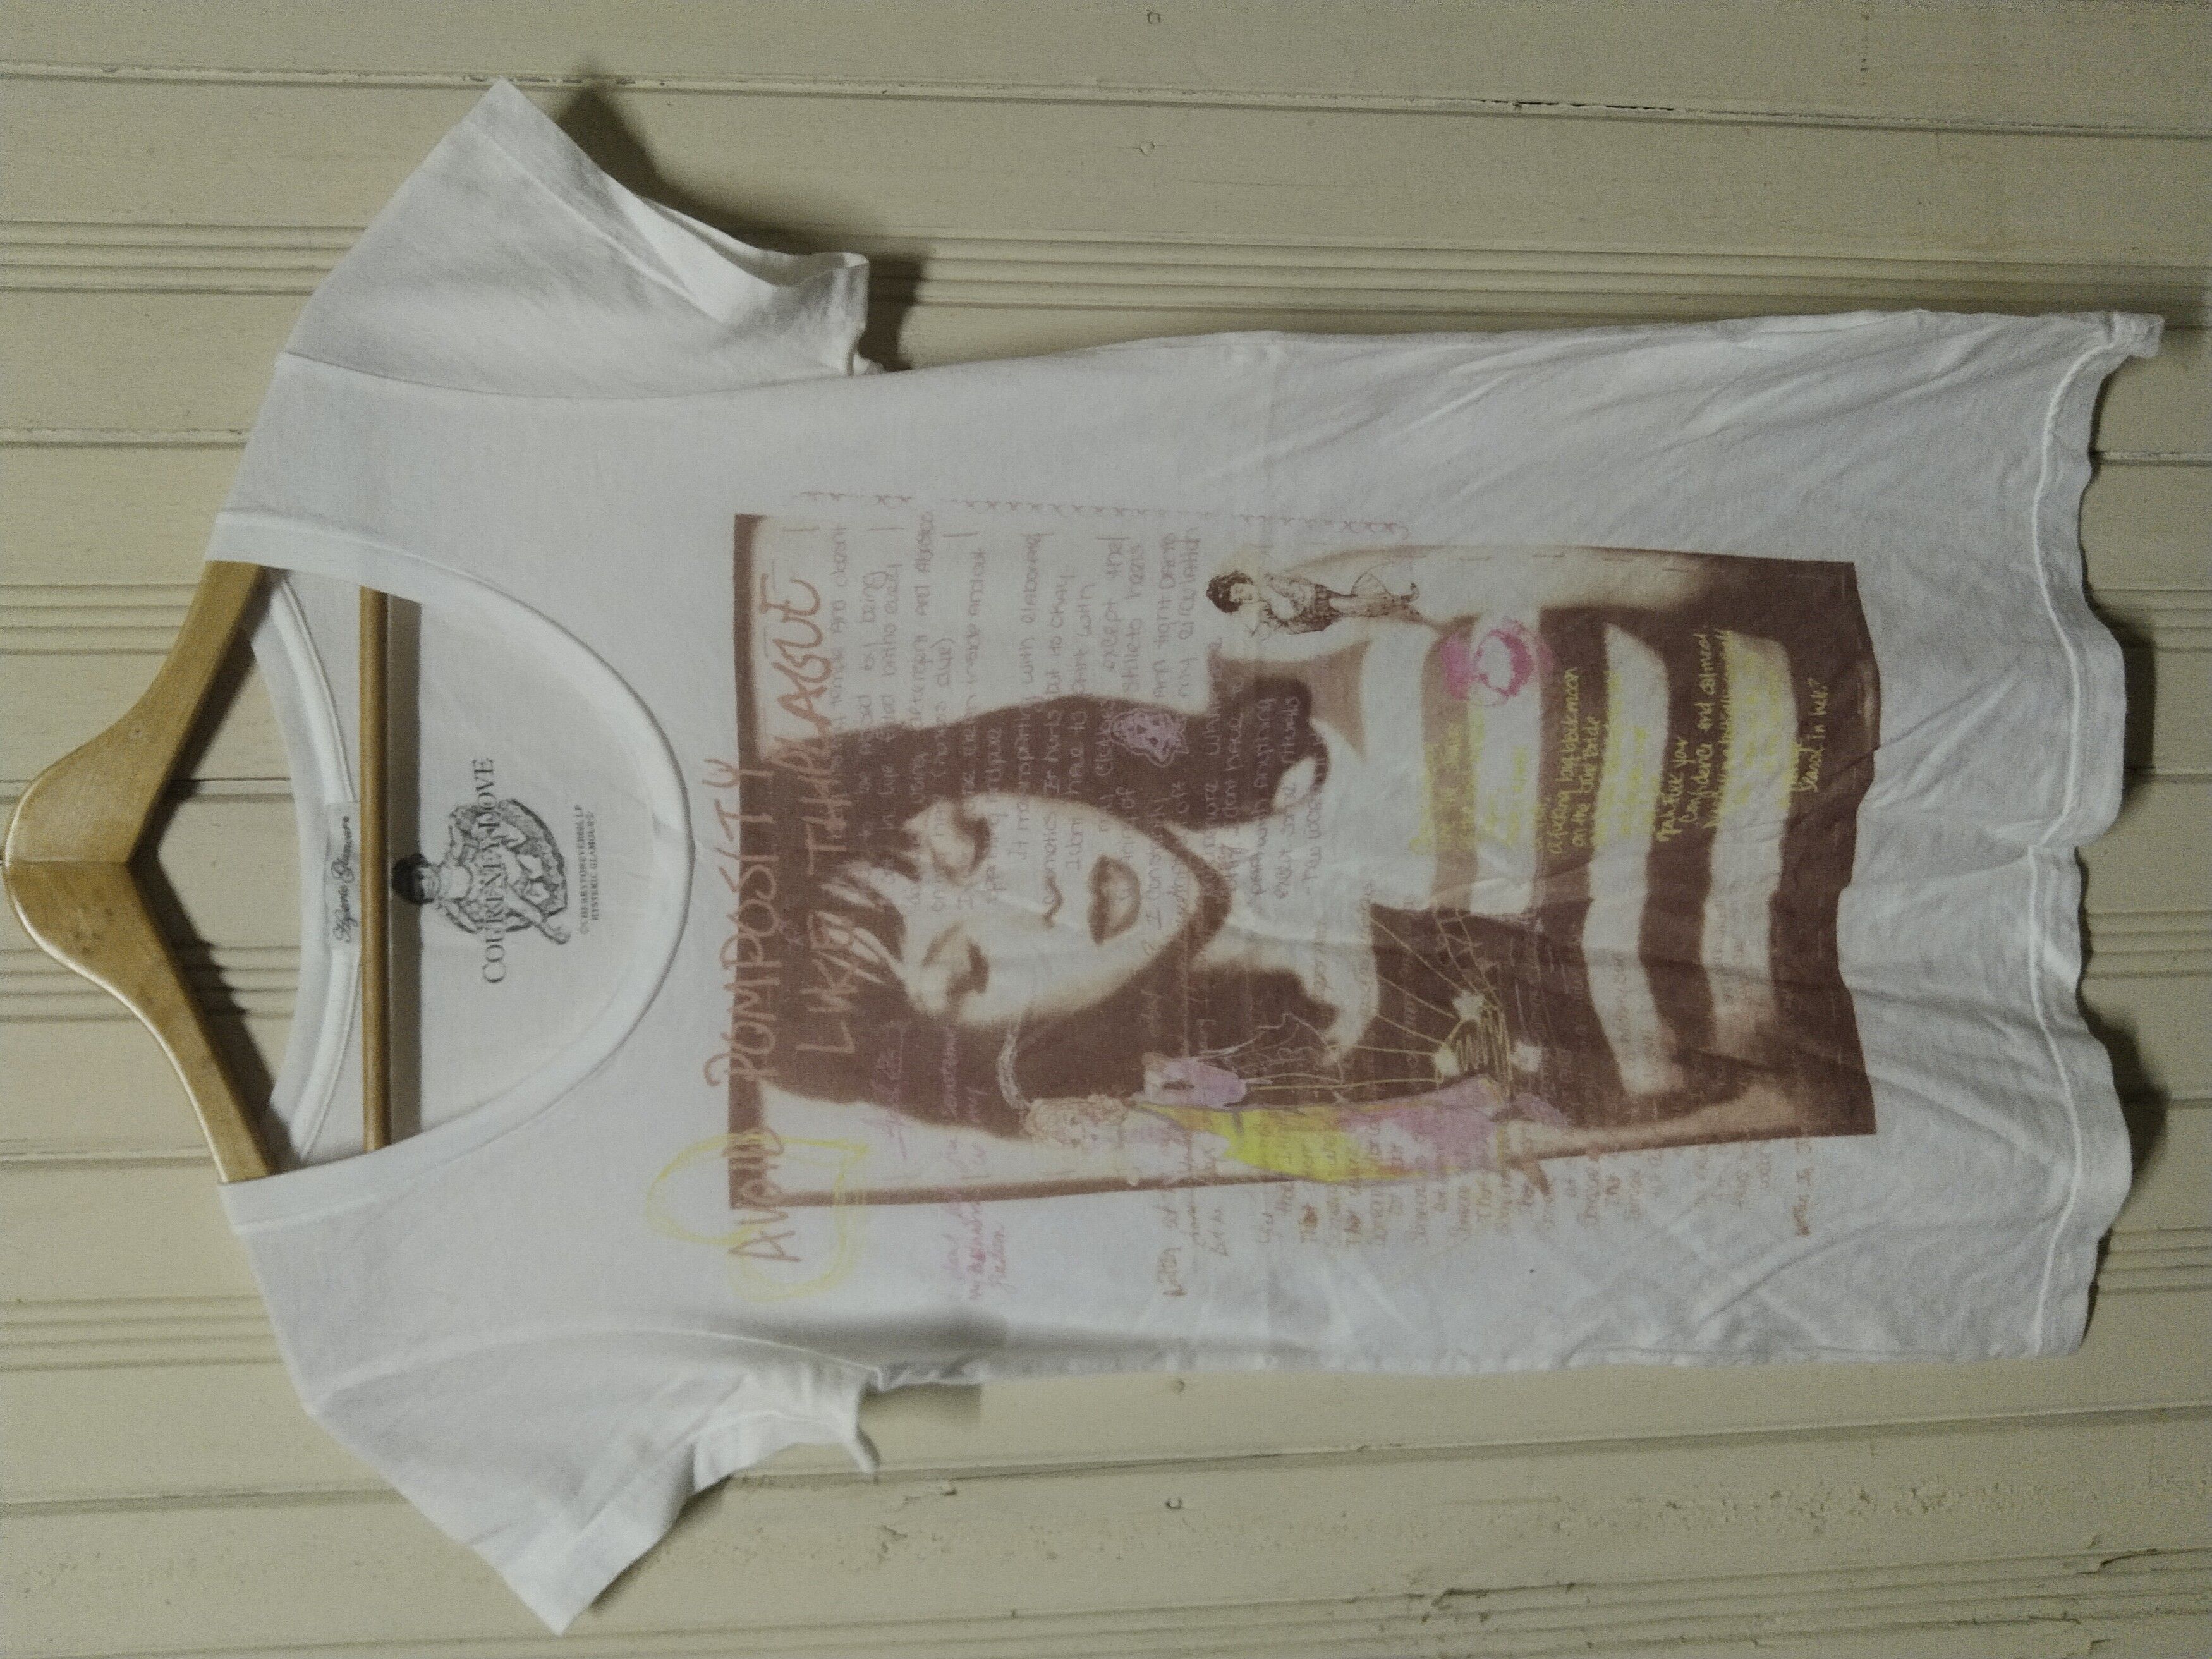 Hysteric Glamour Hysteric Glamour Courtney Love Shirt | Grailed